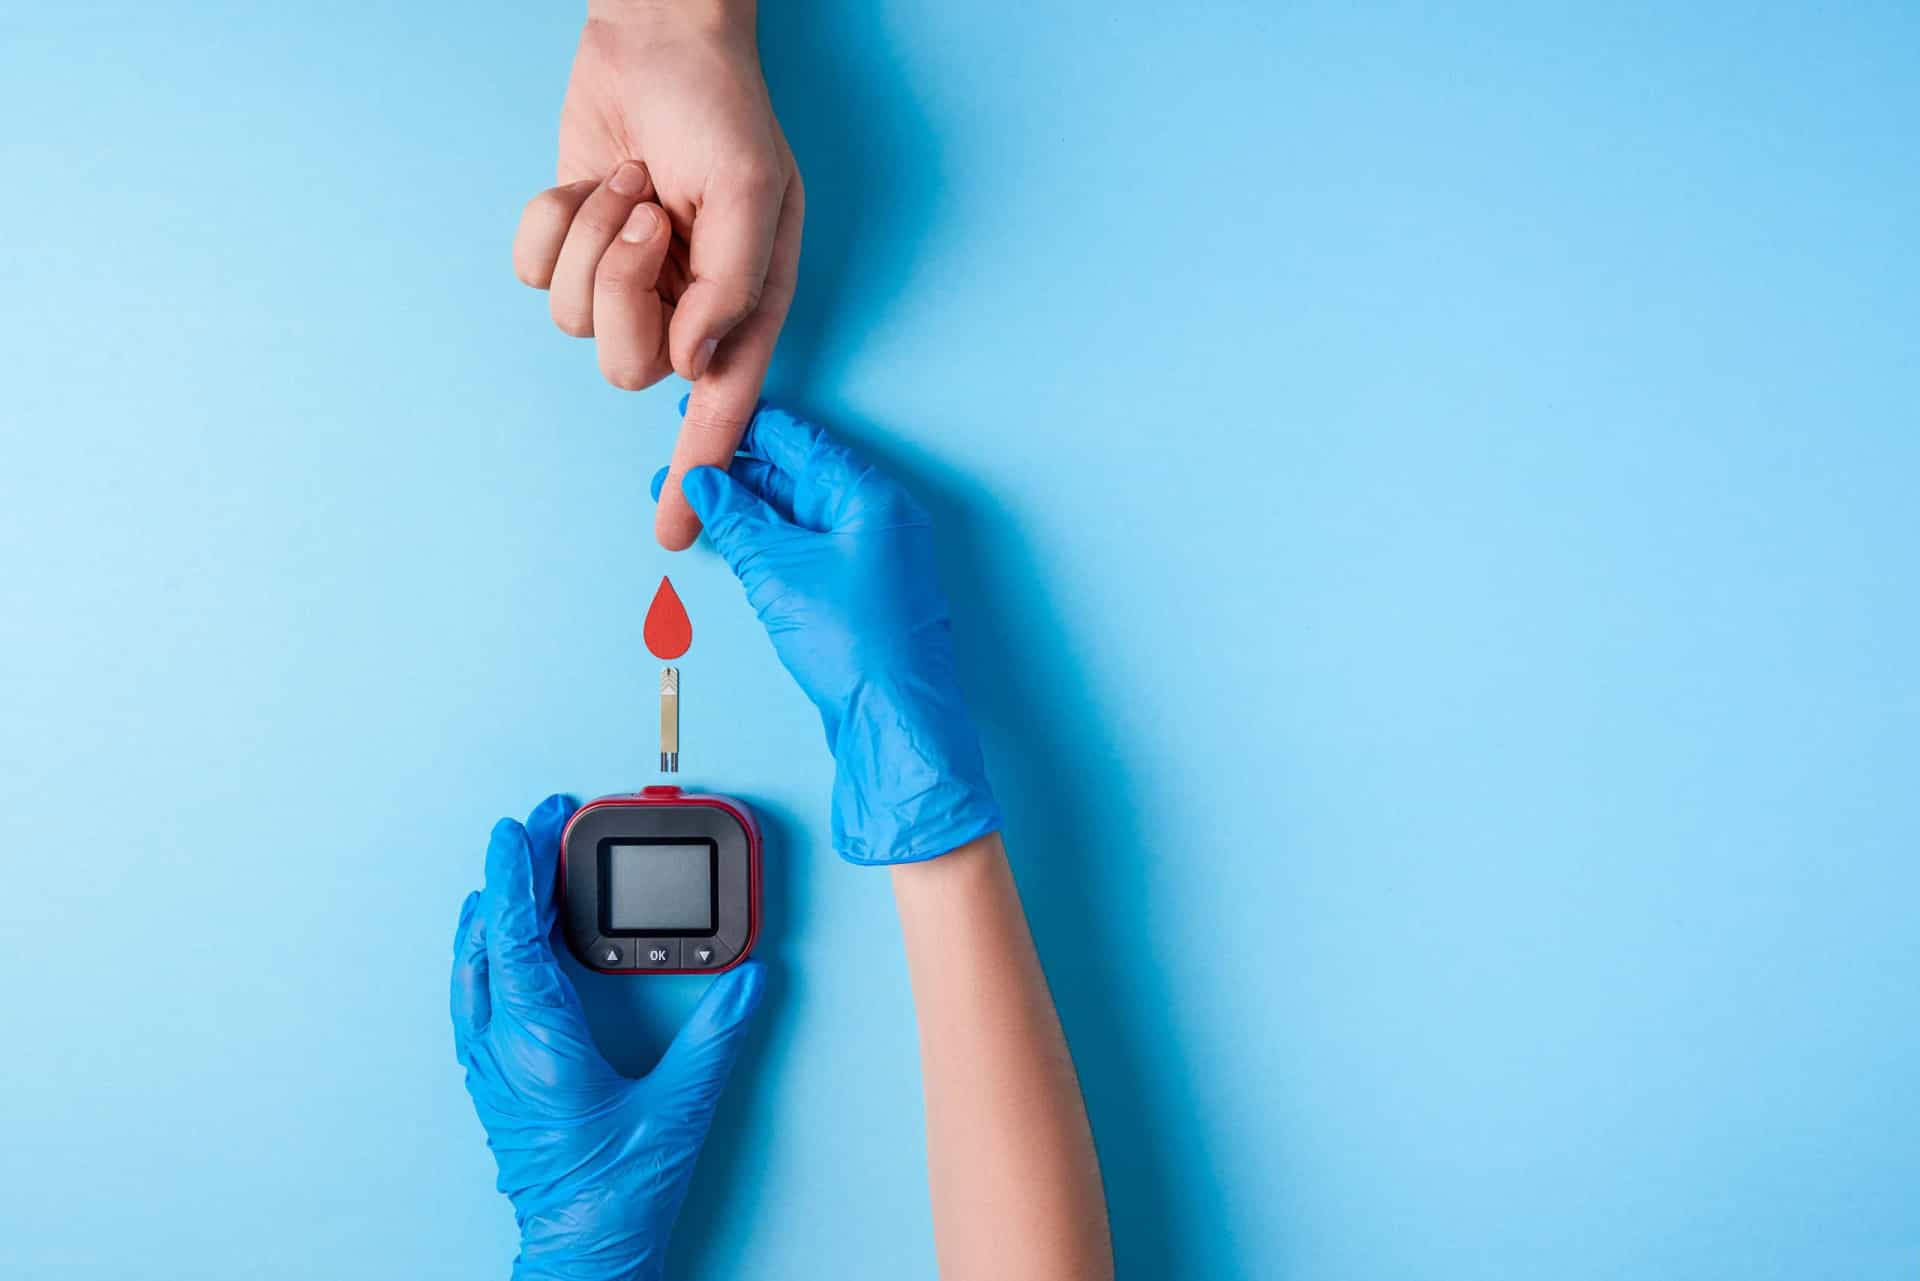 <p>Type 2 diabetes seems to happen more often in people with blood types A and B. However, more research is needed to understand why.</p><p><a href="https://www.msn.com/en-us/community/channel/vid-7xx8mnucu55yw63we9va2gwr7uihbxwc68fxqp25x6tg4ftibpra?cvid=94631541bc0f4f89bfd59158d696ad7e">Follow us and access great exclusive content everyday</a></p>